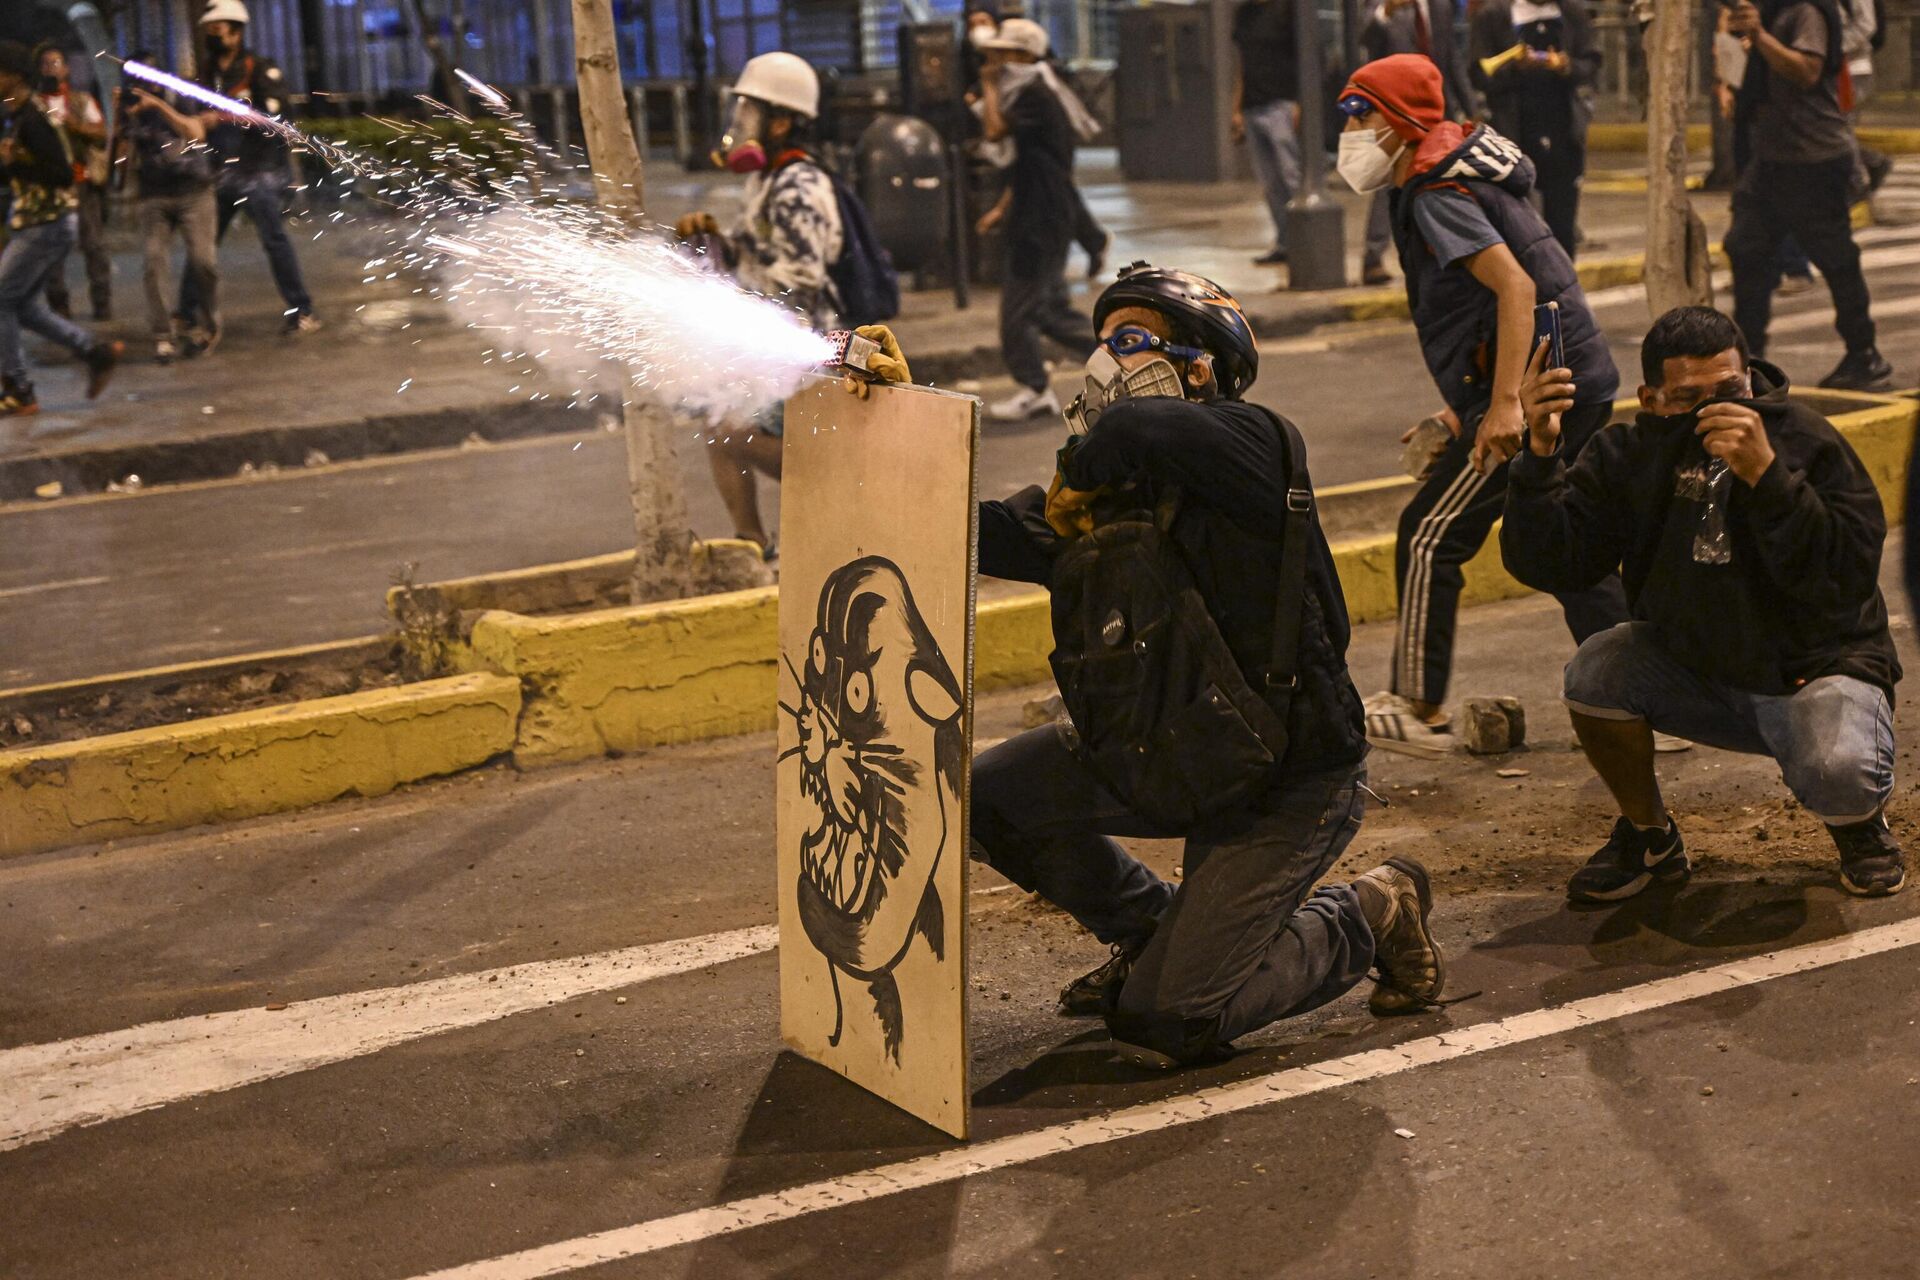 Supporters of former President Pedro Castillo launch firecrackers at riot police during a protest near the Congress in Lima on December 12, 2022 - Sputnik International, 1920, 17.12.2022